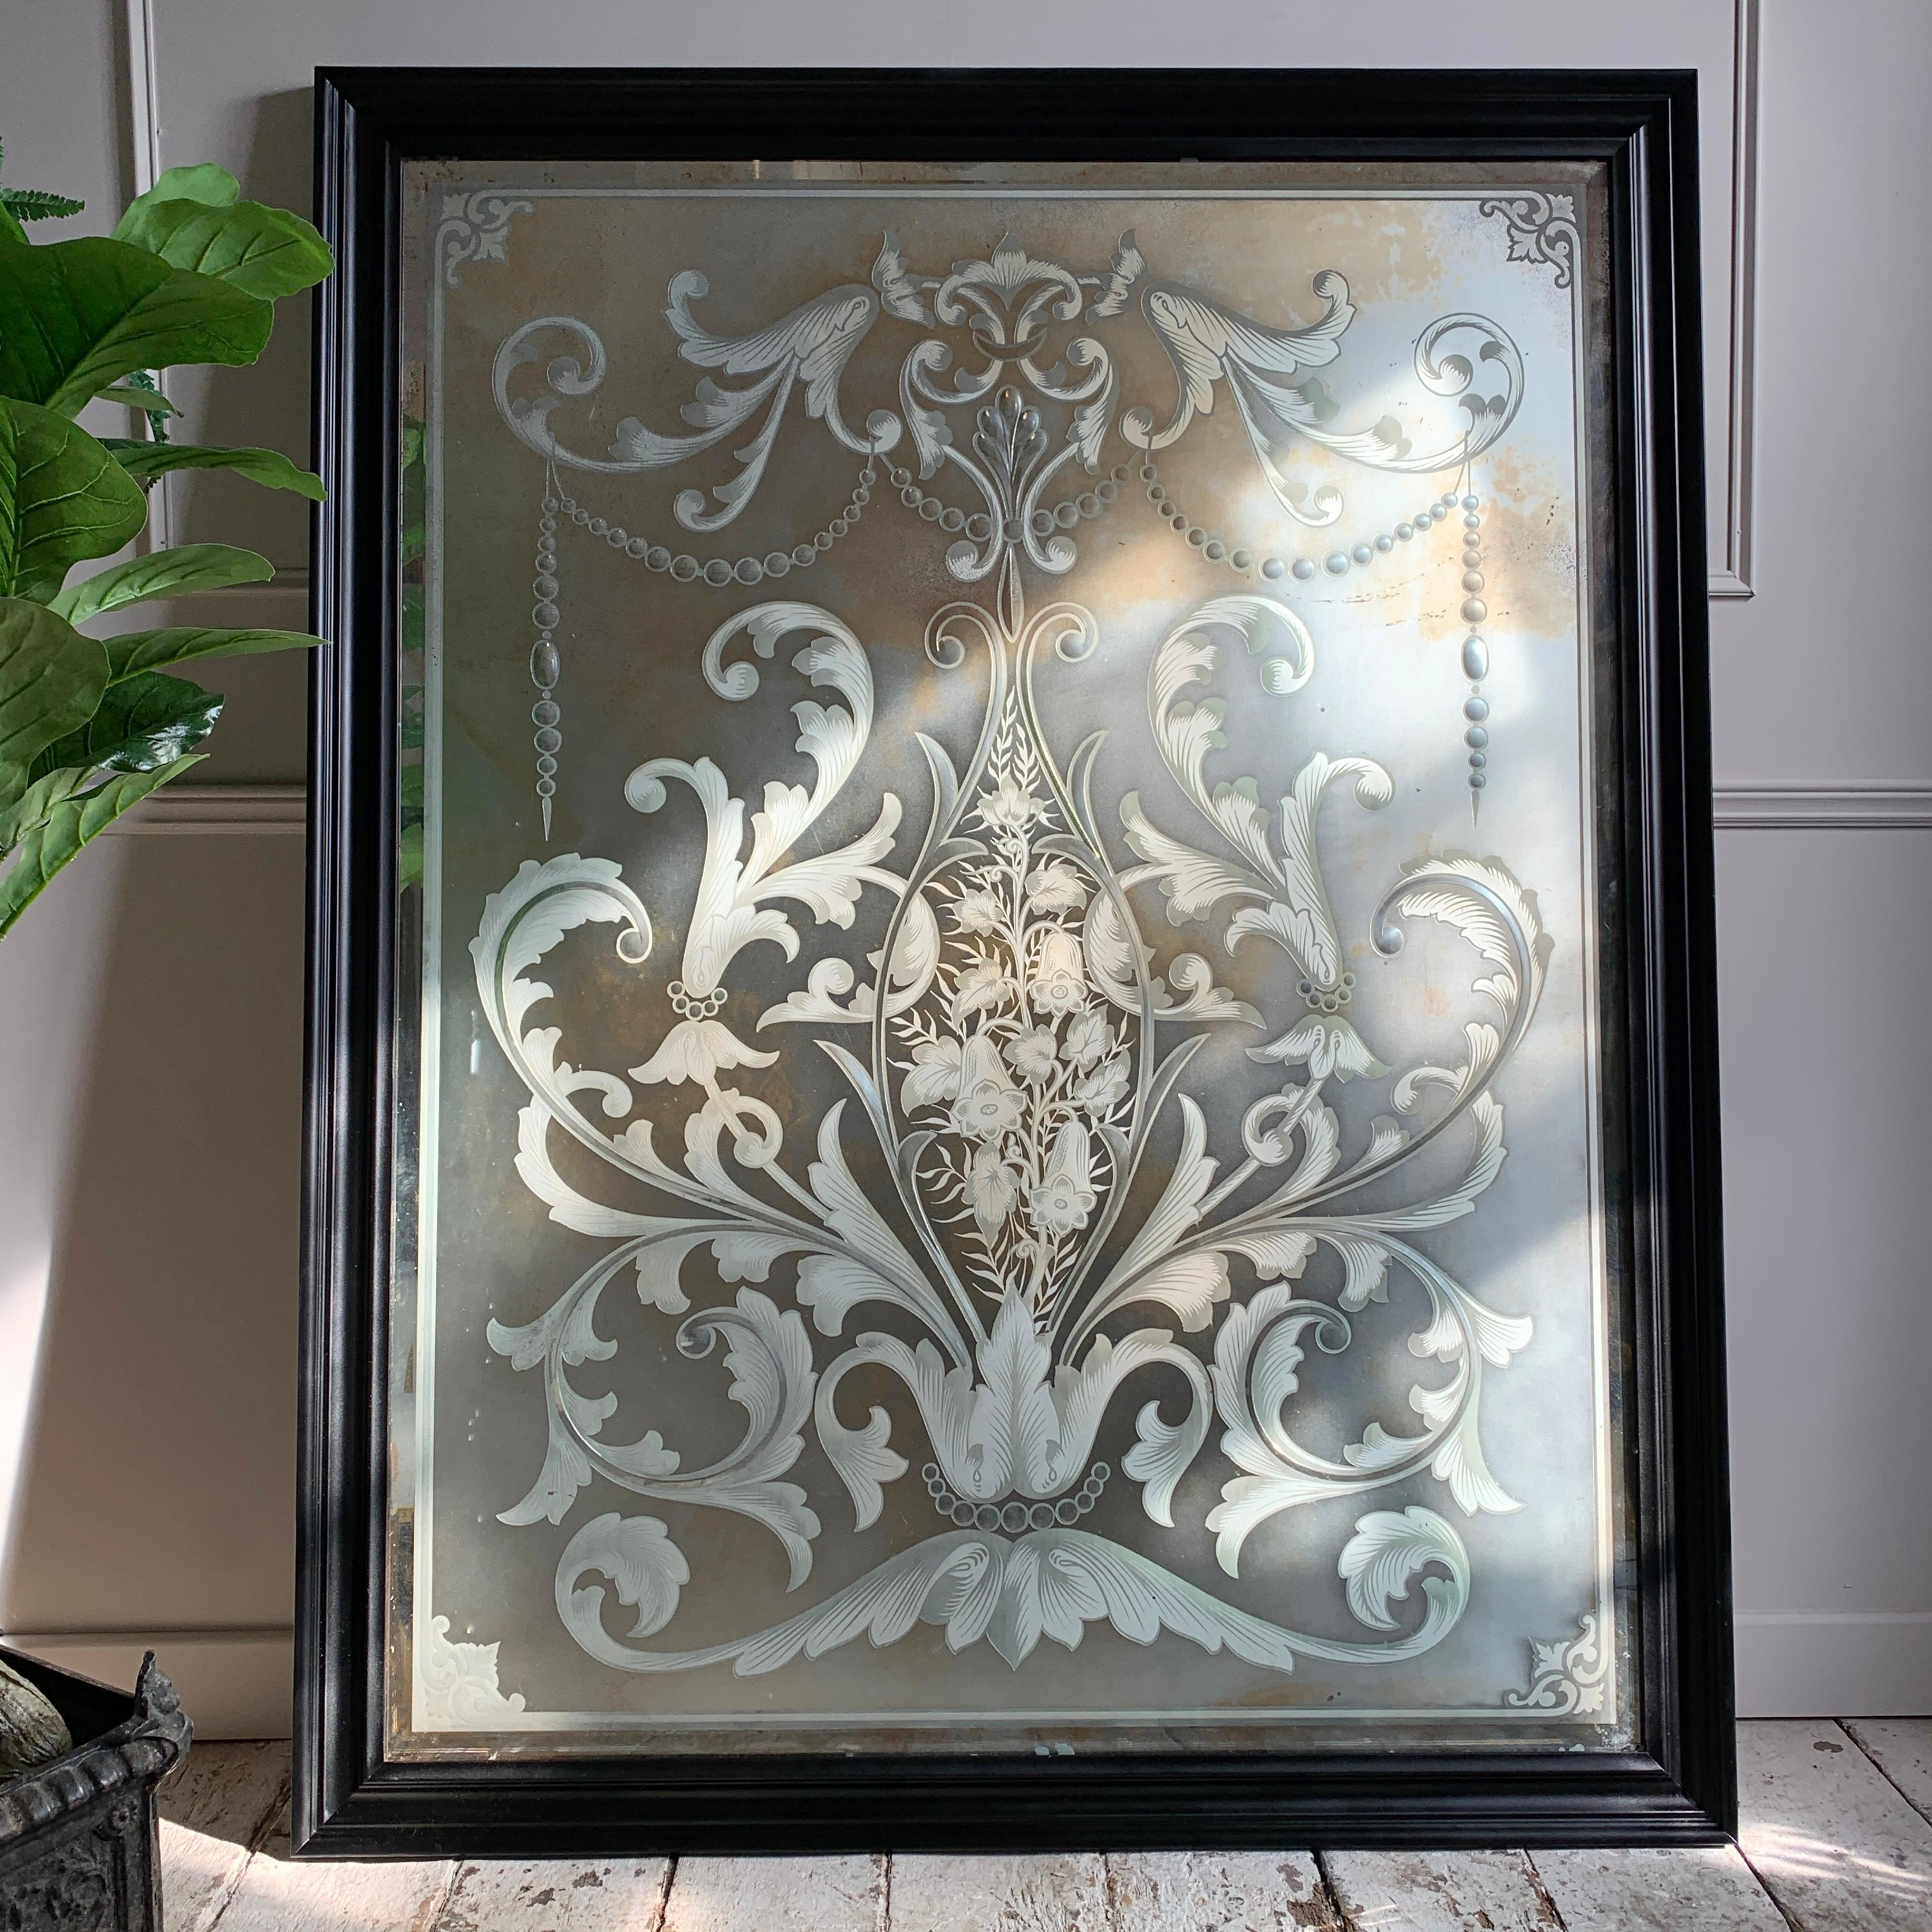 This is an absolutely beautiful and very large scale Victorian pub mirror, removed from the saloon of a London public house, the etched and beveled plate is profuse with scrolls, swags, acanthus leaves, floral designs and garland decoration.

We